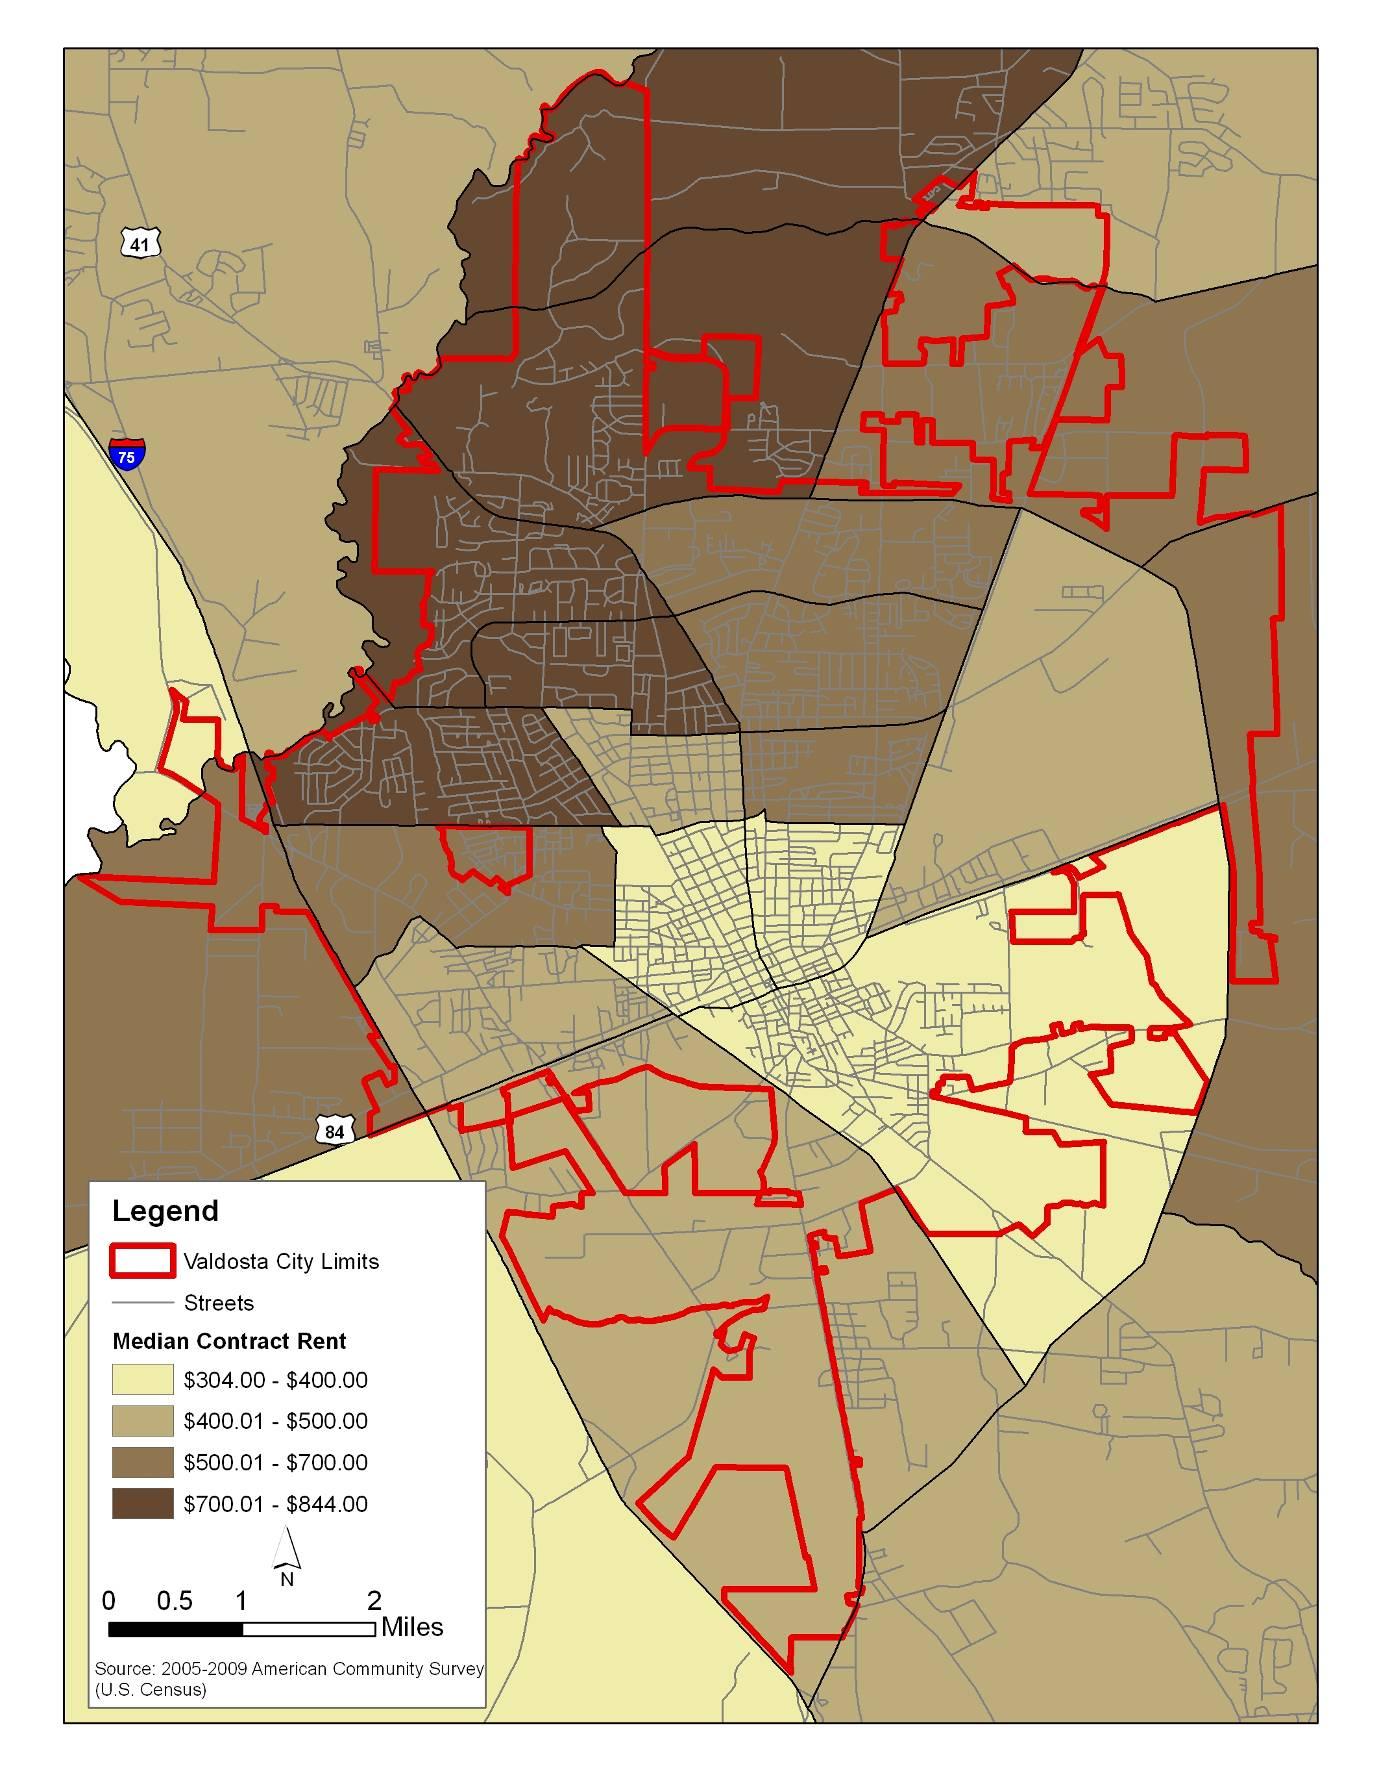 P 25 Map 1.13 Median Contract Rent 2005-2009